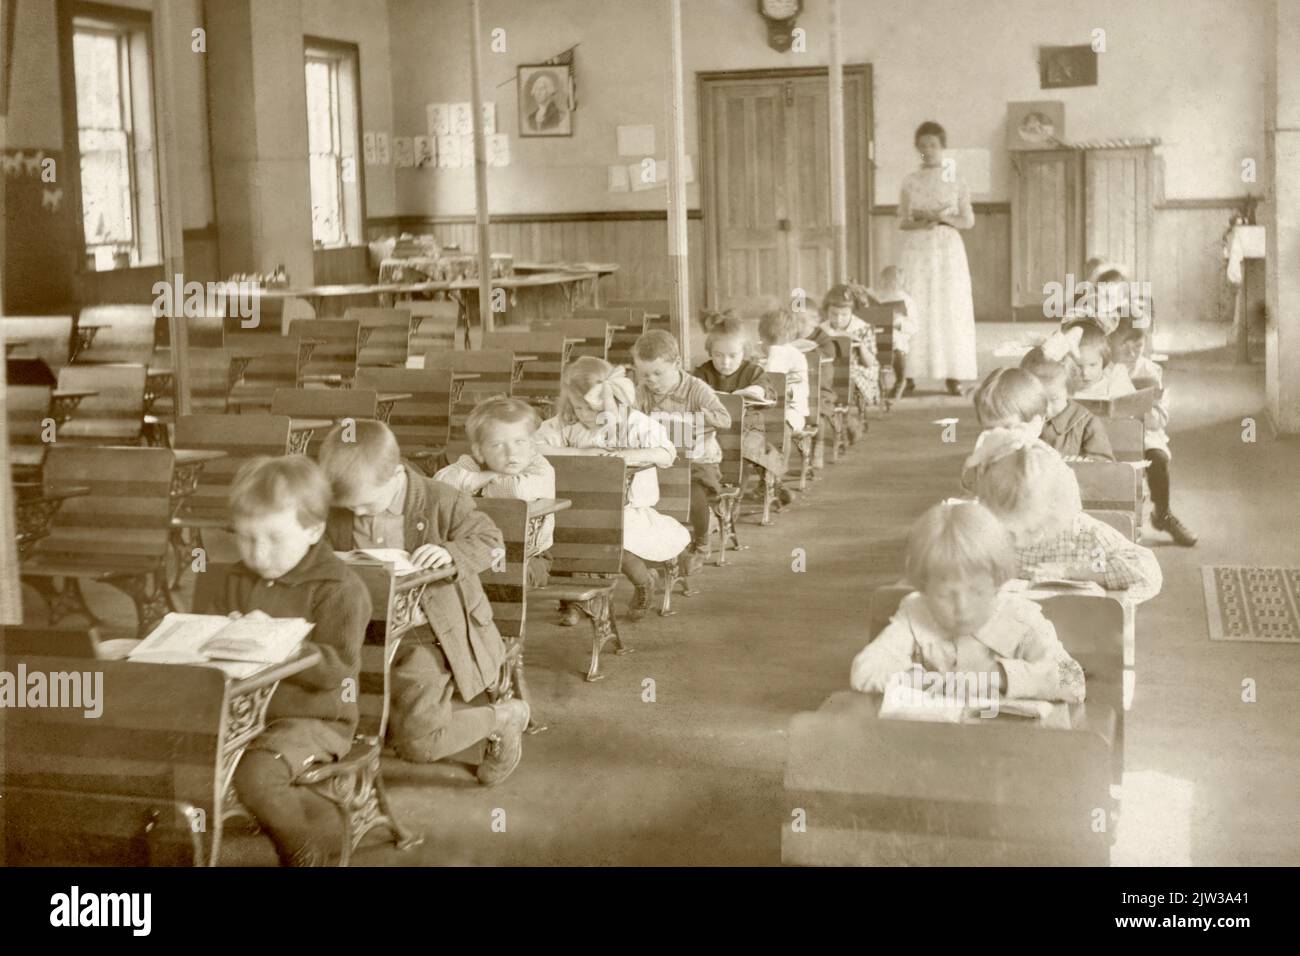 One-Room Schoolhouse interior about 1900, Classroom Interior, One Room School,  Vintage One Room School,  Old Fashioned American School, Old School House, Old School, Stock Photo